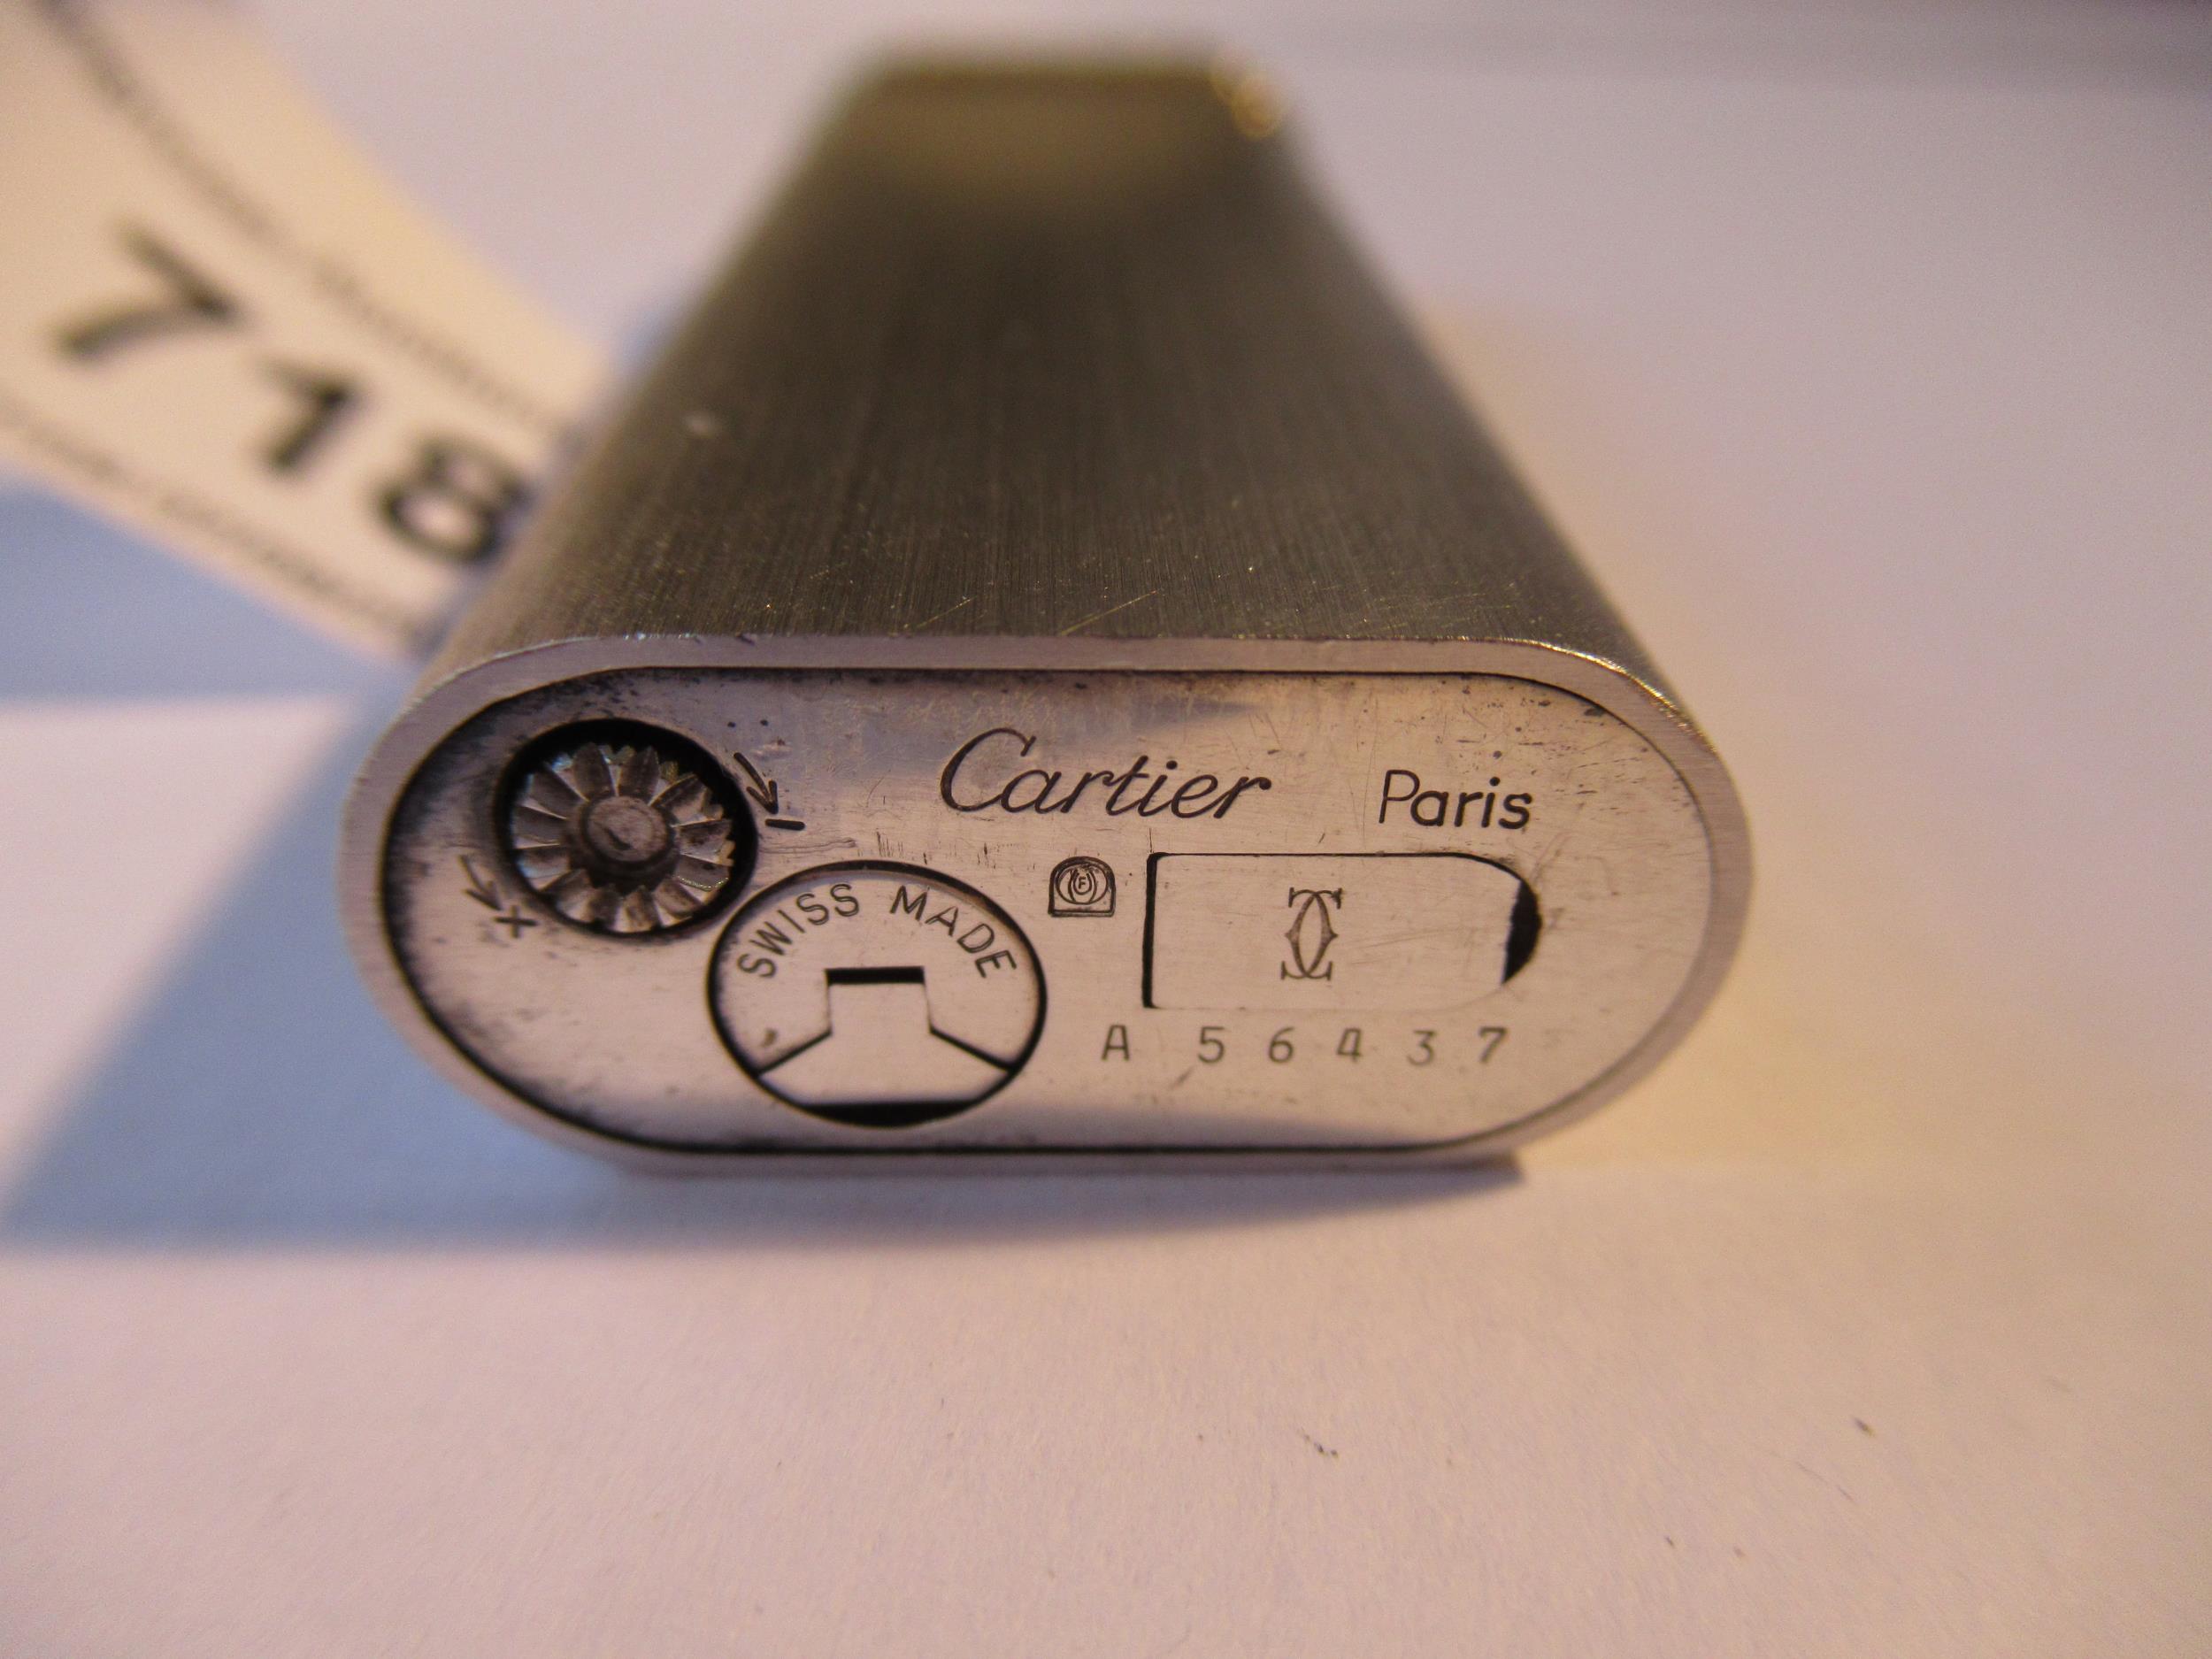 Cartier Paris, stainless steel cigarette lighter Mechanism functions but there is no spark or flame - Image 3 of 3